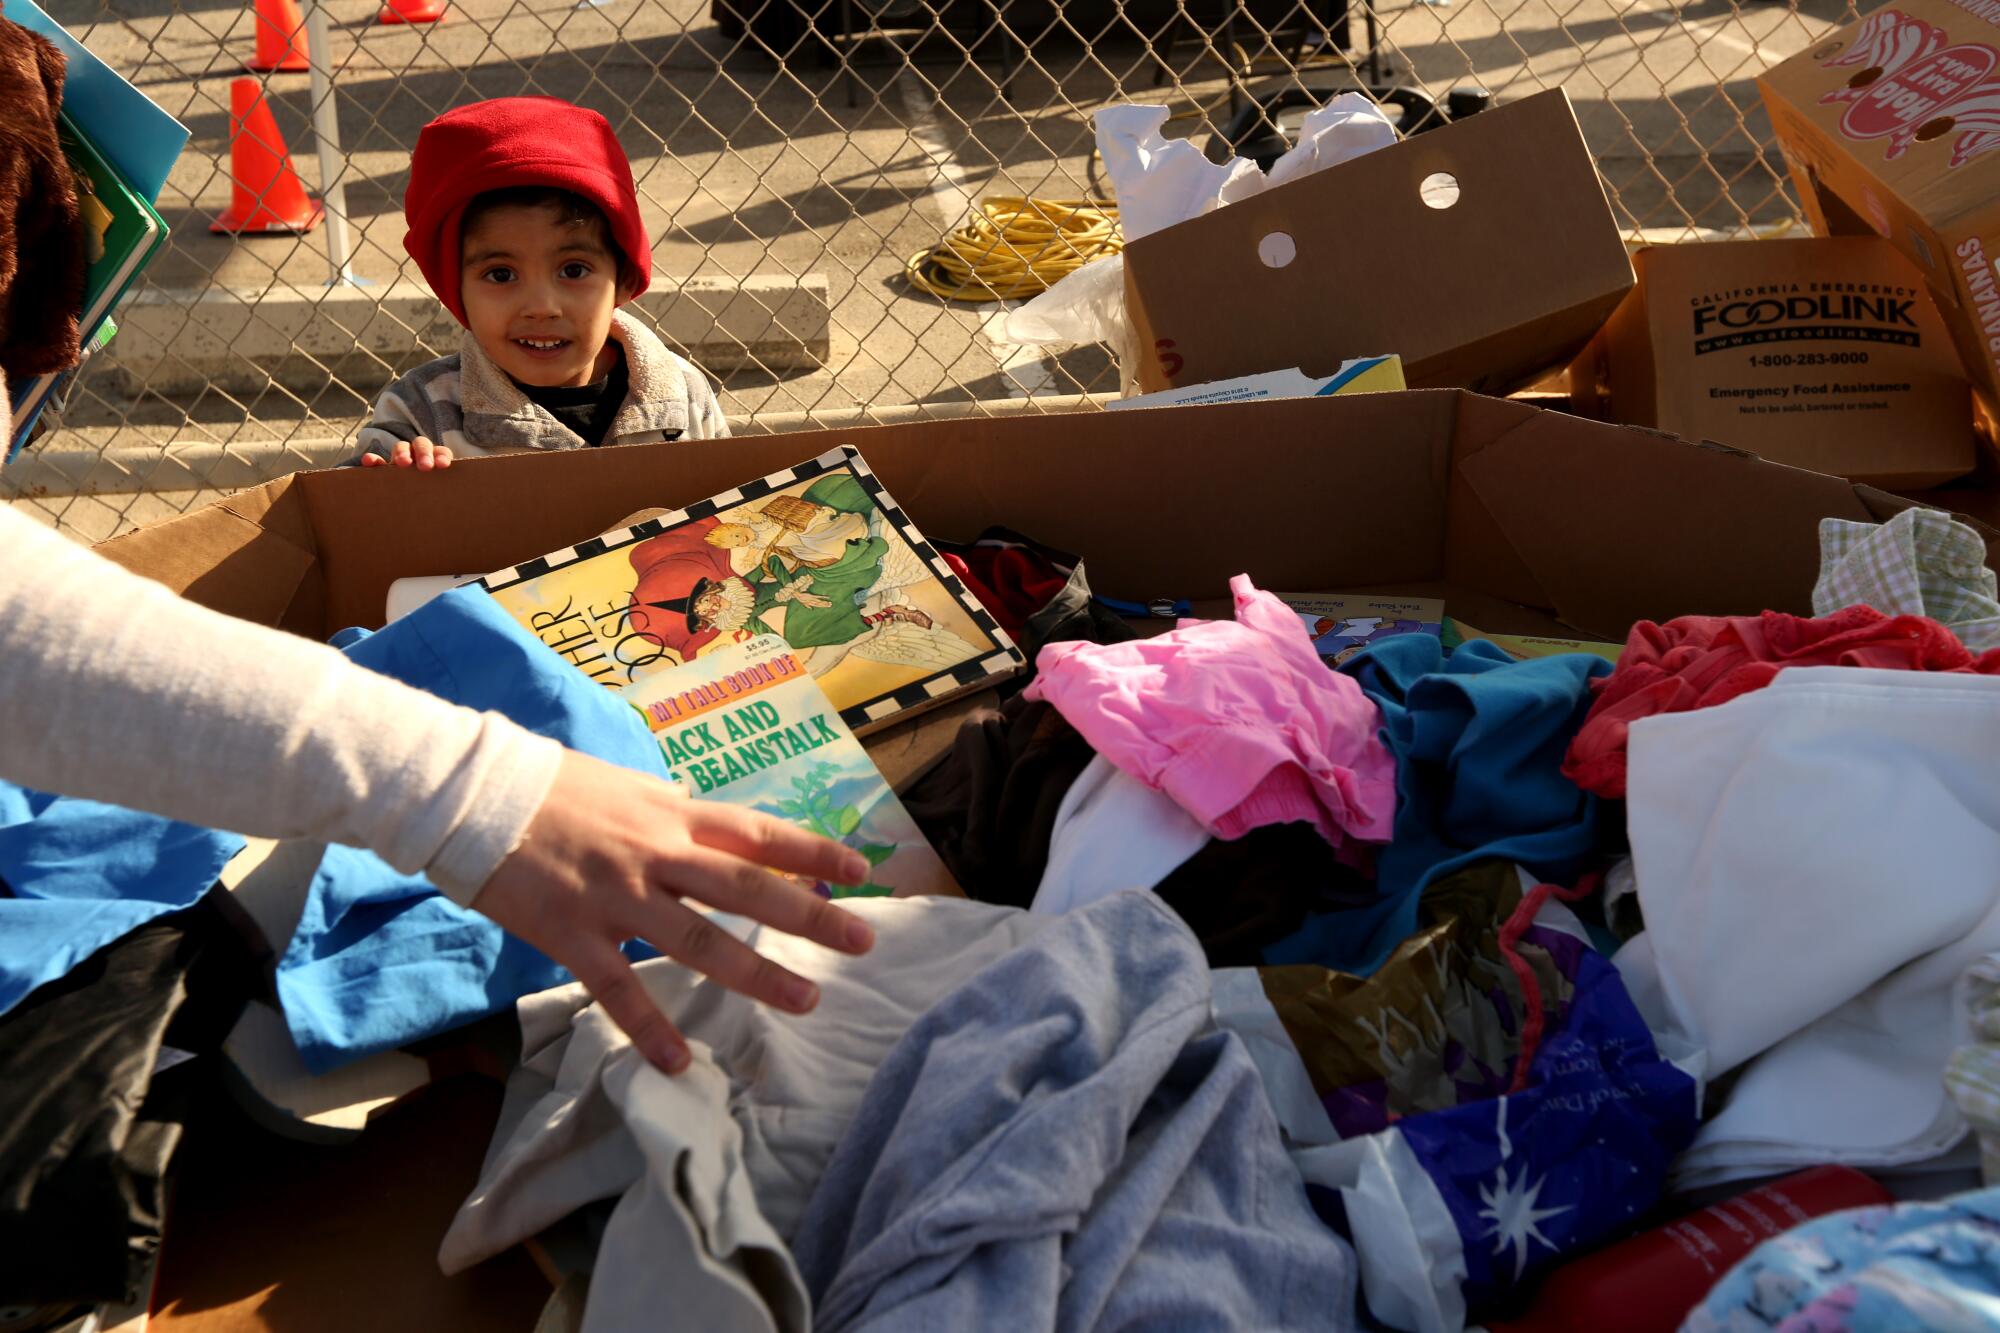 A young boy looks at a box of free clothing and books